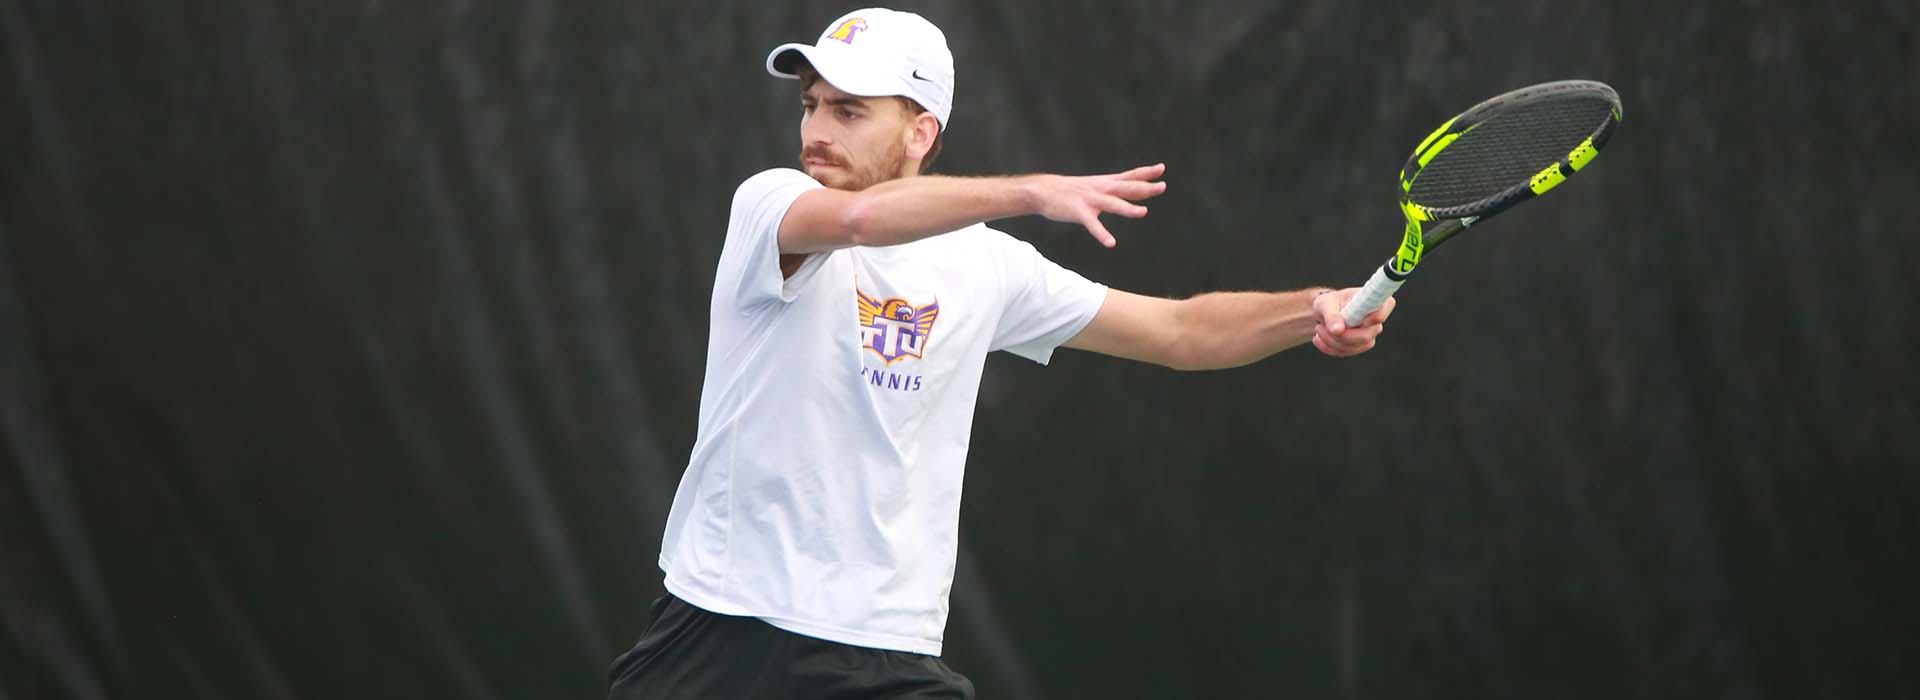 Golden Eagles claim eighth OVC regular-season title in last 10 years behind 7-0 win over Austin Peay